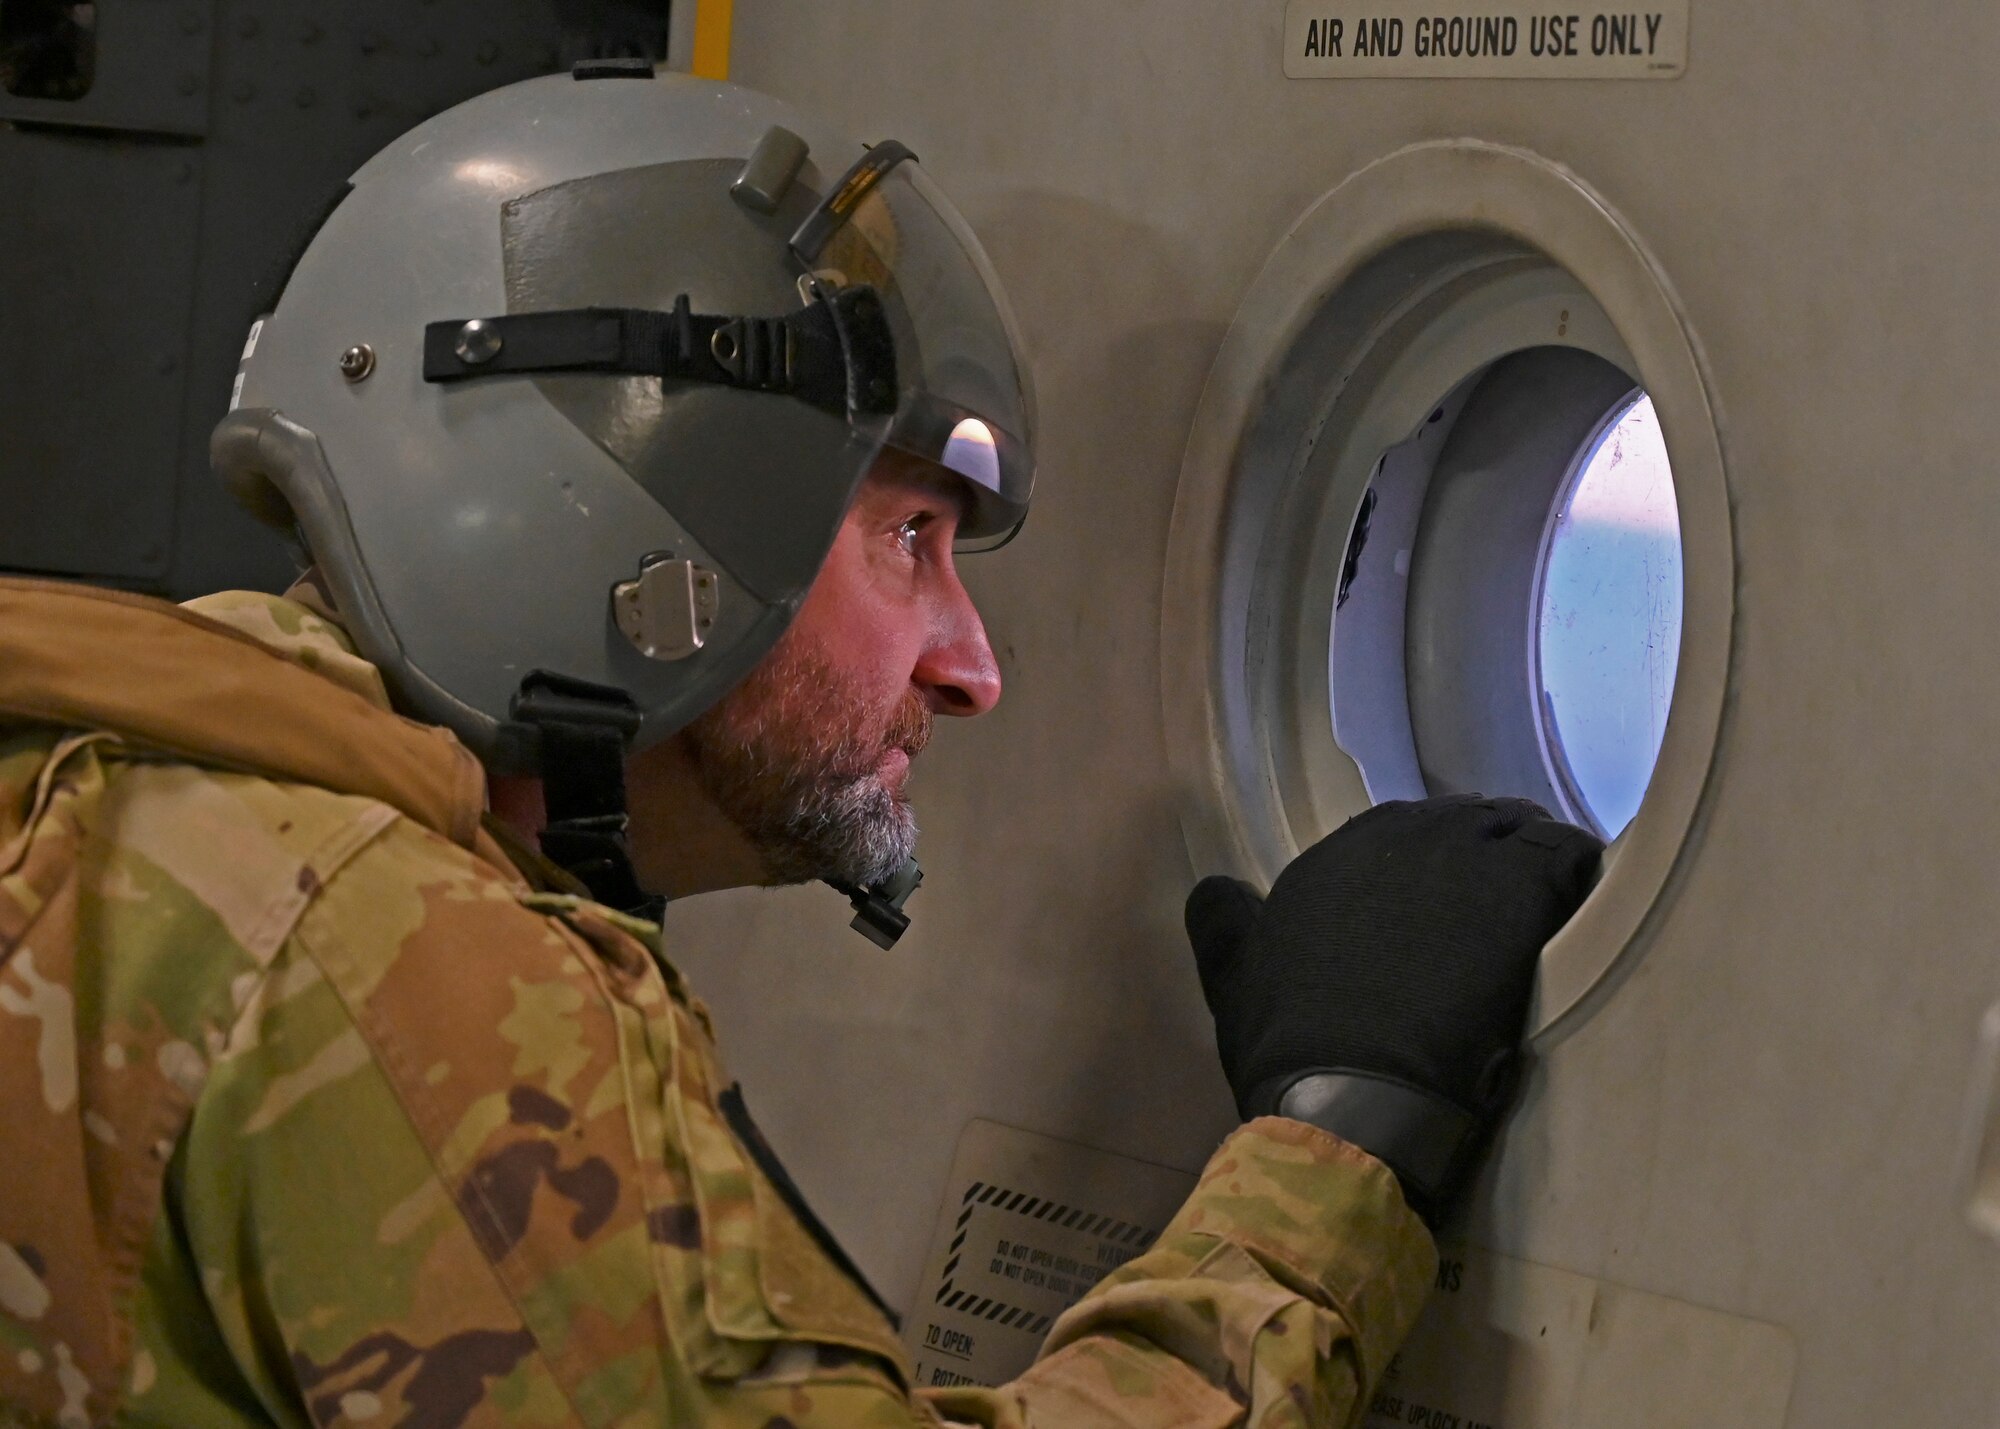 U.S Air Force Master Sgt. Kent Koerner, loadmaster with the 7th Expeditionary Airlift Squadron, looks out the troop door window on a C-17 Globemaster III assigned to Joint Base Lewis-McChord, Washington, during DEFENDER 23 at Base Aerea De Zaragoza, Spain, May 10, 2023. DEFENDER 23 is a U.S. Army Europe and Africa-led exercise, supported by U.S. Air Forces in Europe – Air Forces Africa, focused on the strategic deployment of continental United States-based forces and interoperability with Allies and partners. Taking place from April 22 to June 23, DEFENDER 23 demonstrates the U.S. Air Force’s ability to aggregate U.S.-based combat power quickly in Europe; increase lethality of the NATO Alliance through the U.S. Air Force’s Agile Combat Employment; build unit readiness in a complex joint, multi-national environment; and leverage host nation capabilities to increase USAFE-AFAFRICA’s operational reach. DEFENDER 23 includes more than 7,800 U.S. and 15,000 multi-national service members from various Allied and partner nations. (U.S Air Force photo by Senior Airman Callie Norton)